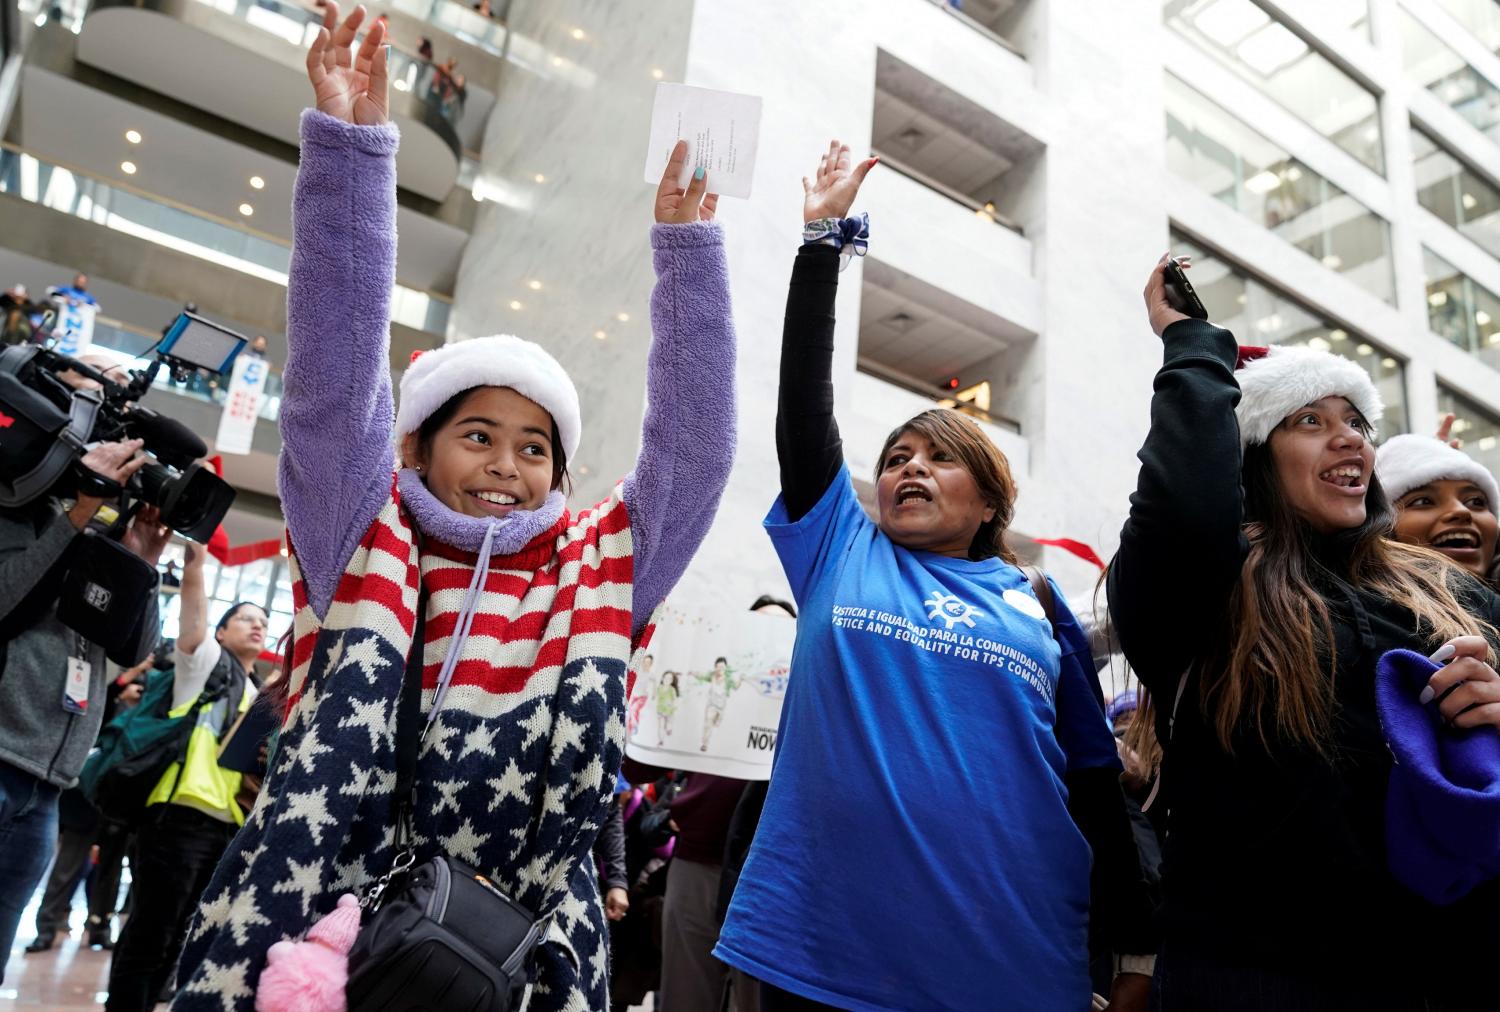 Demonstrators calling for action on immigration rally in the Hart Senate Office Building on Capitol Hill in Washington, U.S., December 3, 2019.      REUTERS/Joshua Roberts